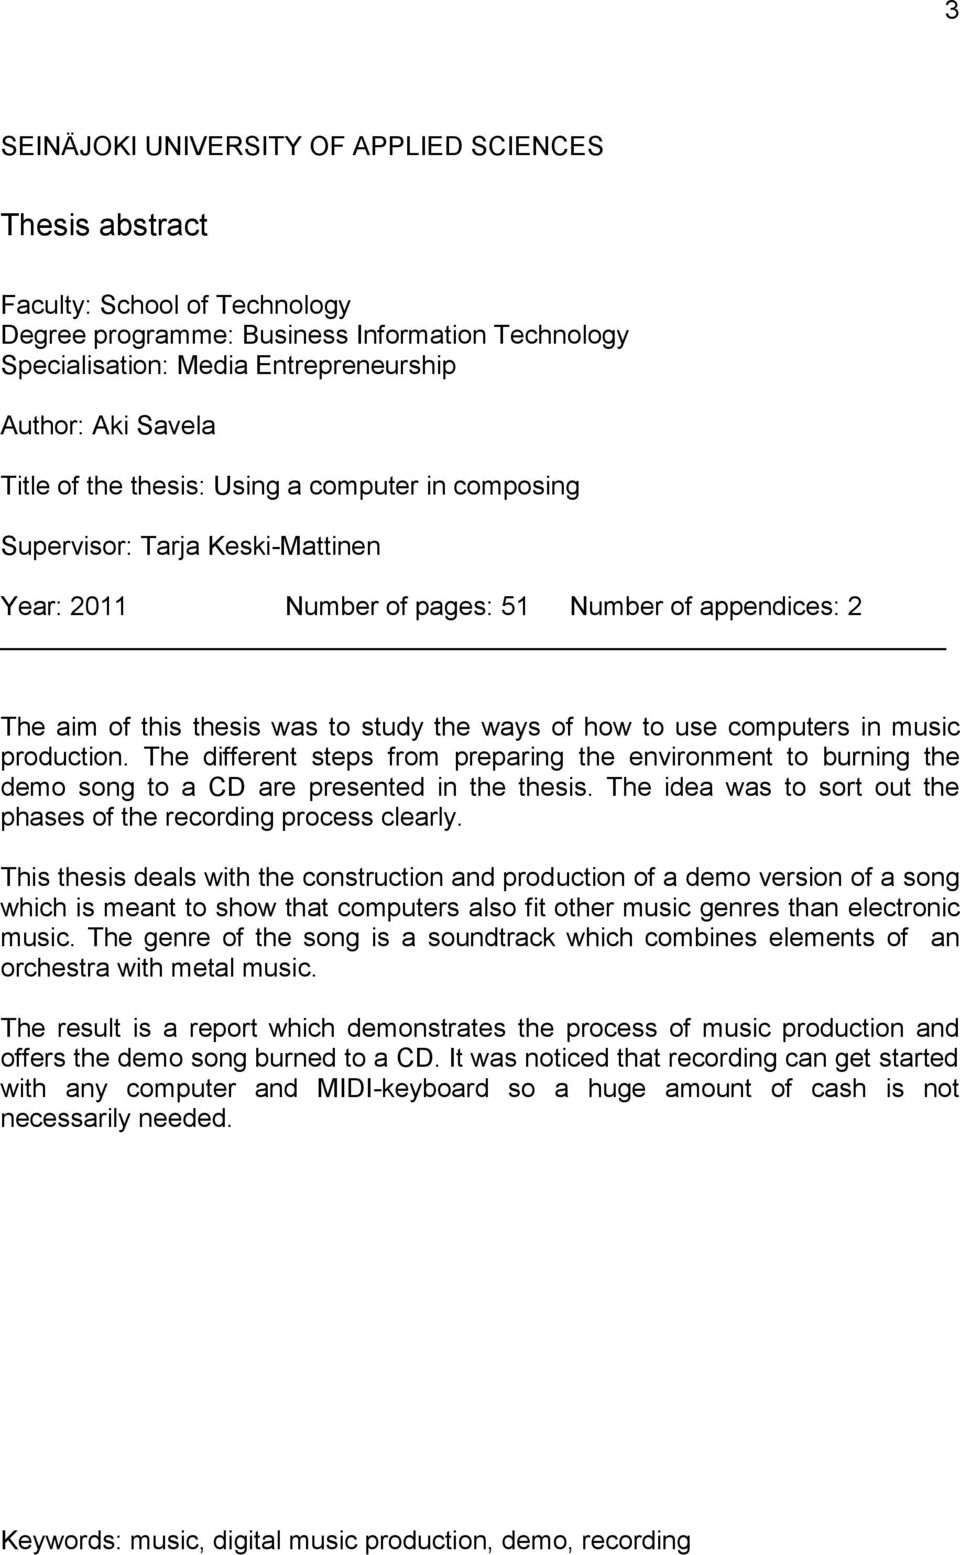 computers in music production. The different steps from preparing the environment to burning the demo song to a CD are presented in the thesis.